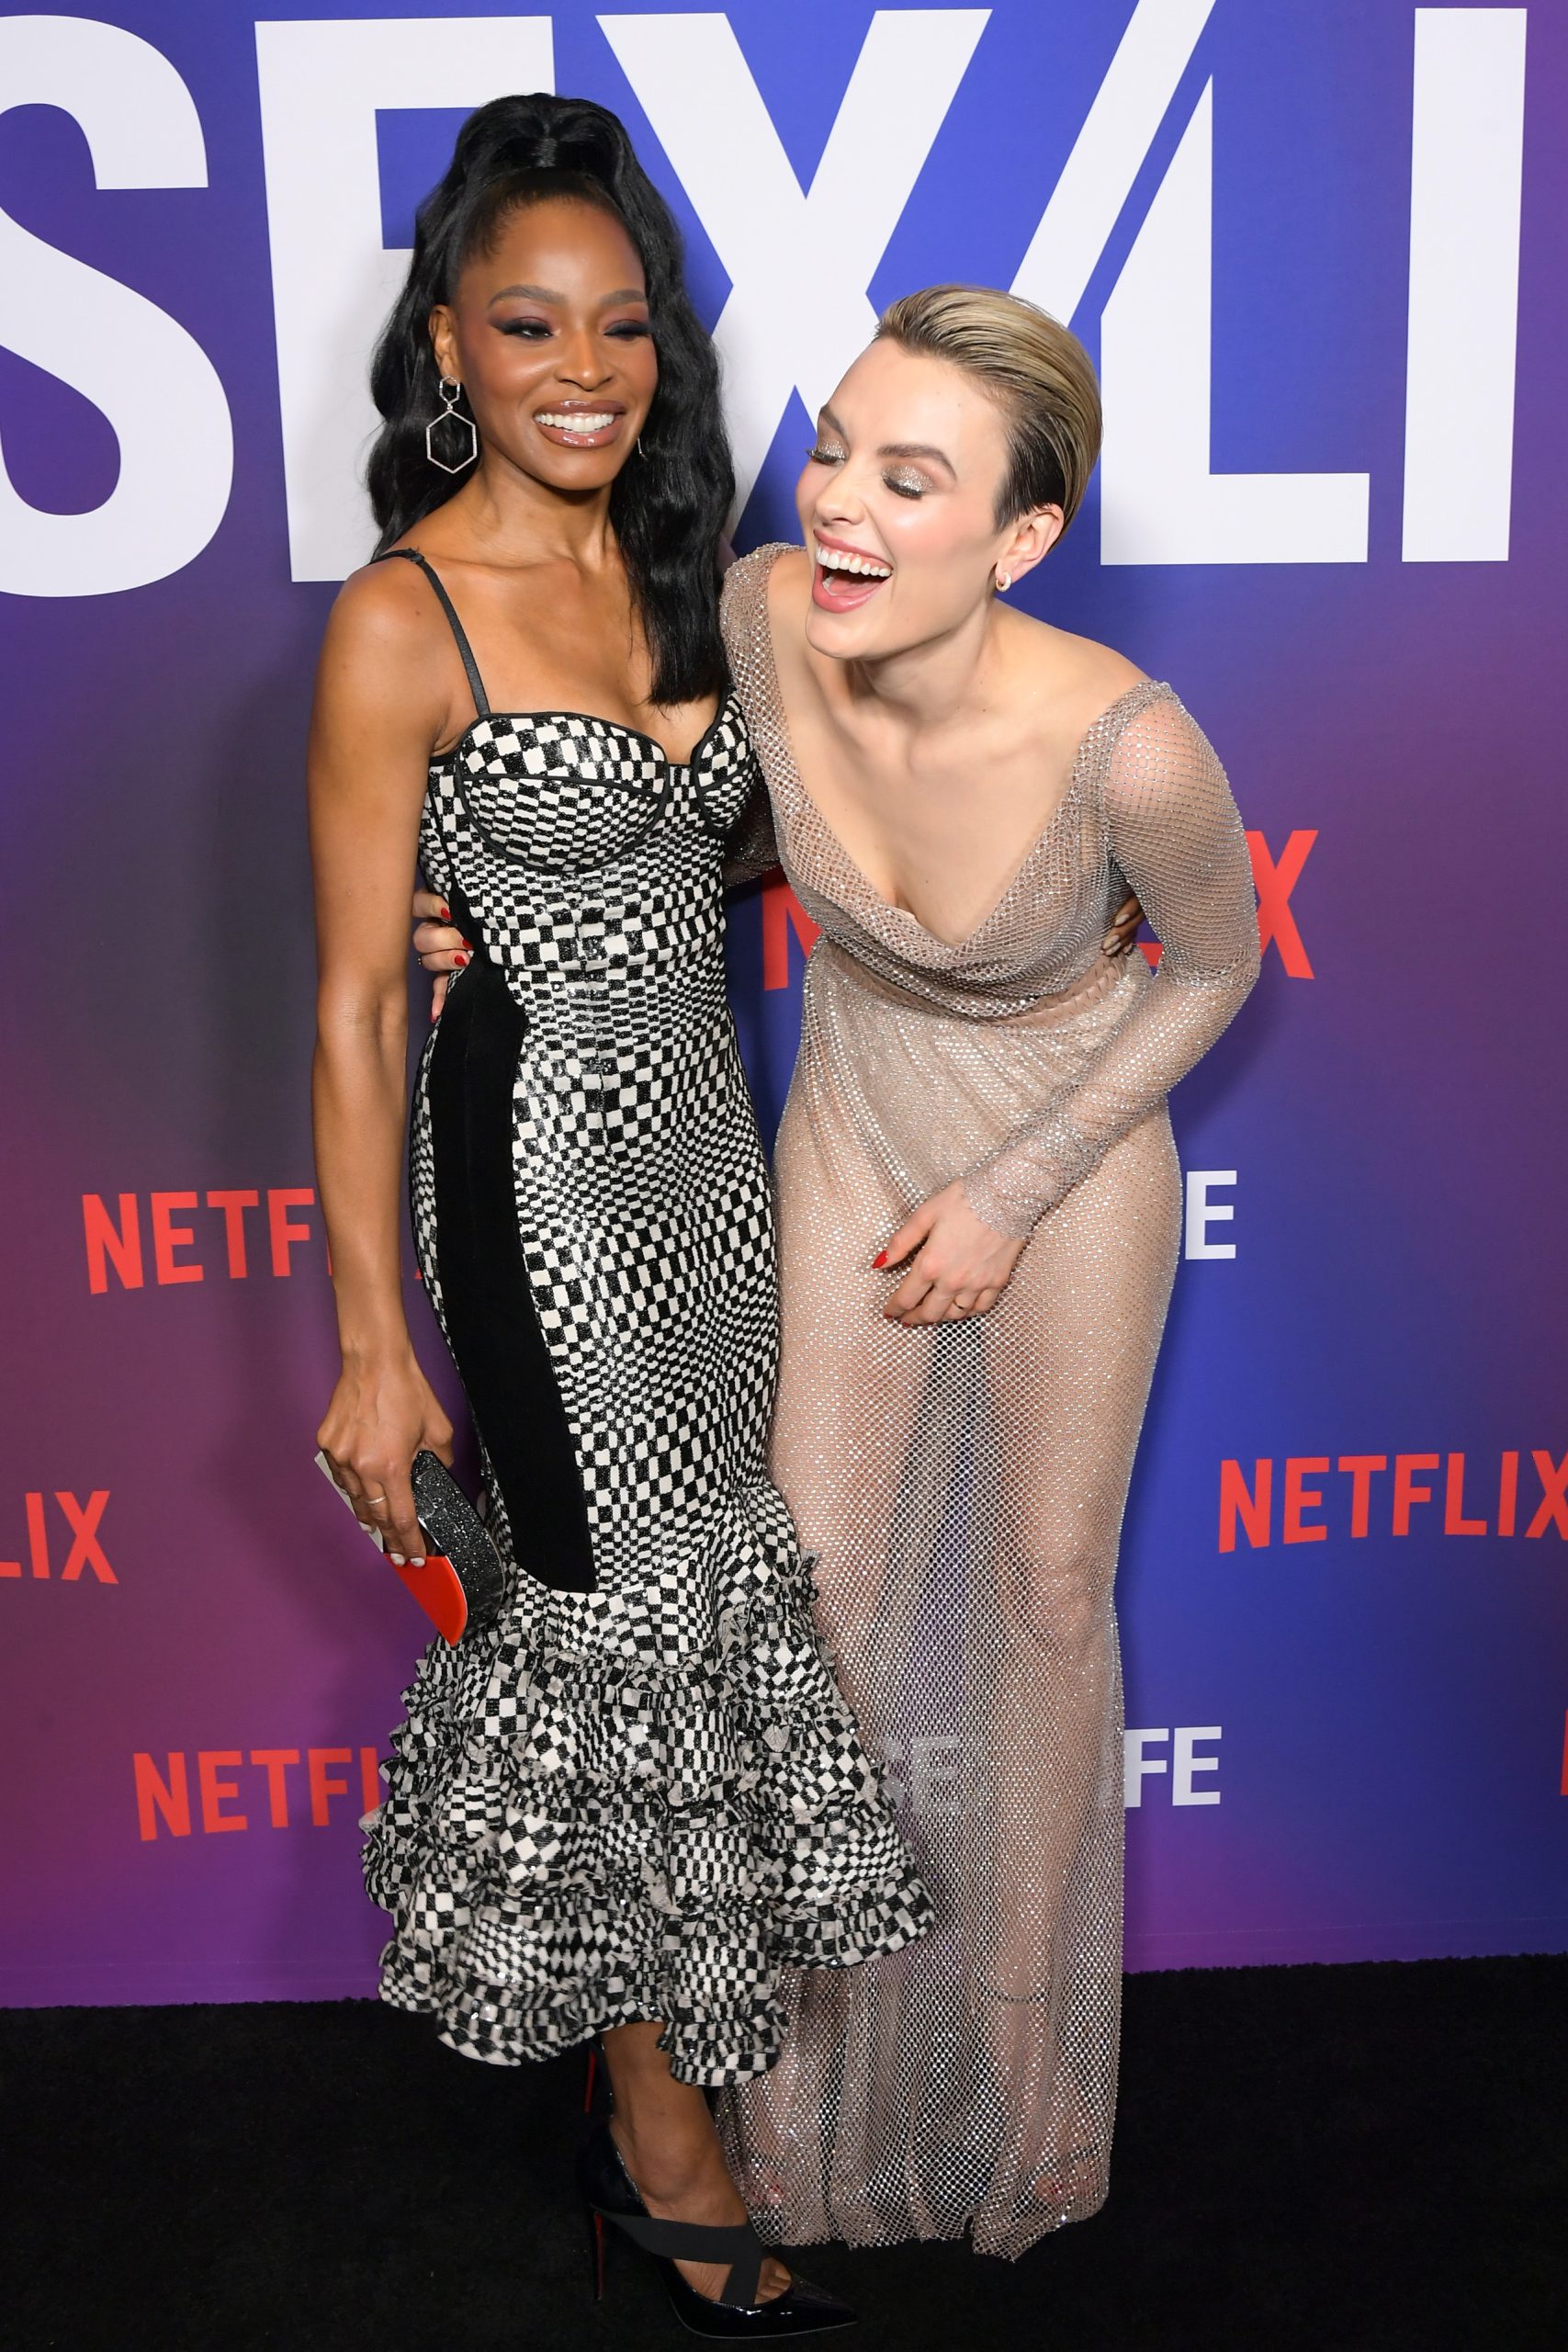 LOS ANGELES, CALIFORNIA - FEBRUARY 23: (L-R) Margaret Odette and Wallis Day attend Netflix's "Sex/Life" Season 2 Special Screening at the Roma Theatre at Netflix - EPIC on February 23, 2023 in Los Angeles, California. (Photo by Charley Gallay/Getty Images for Netflix)